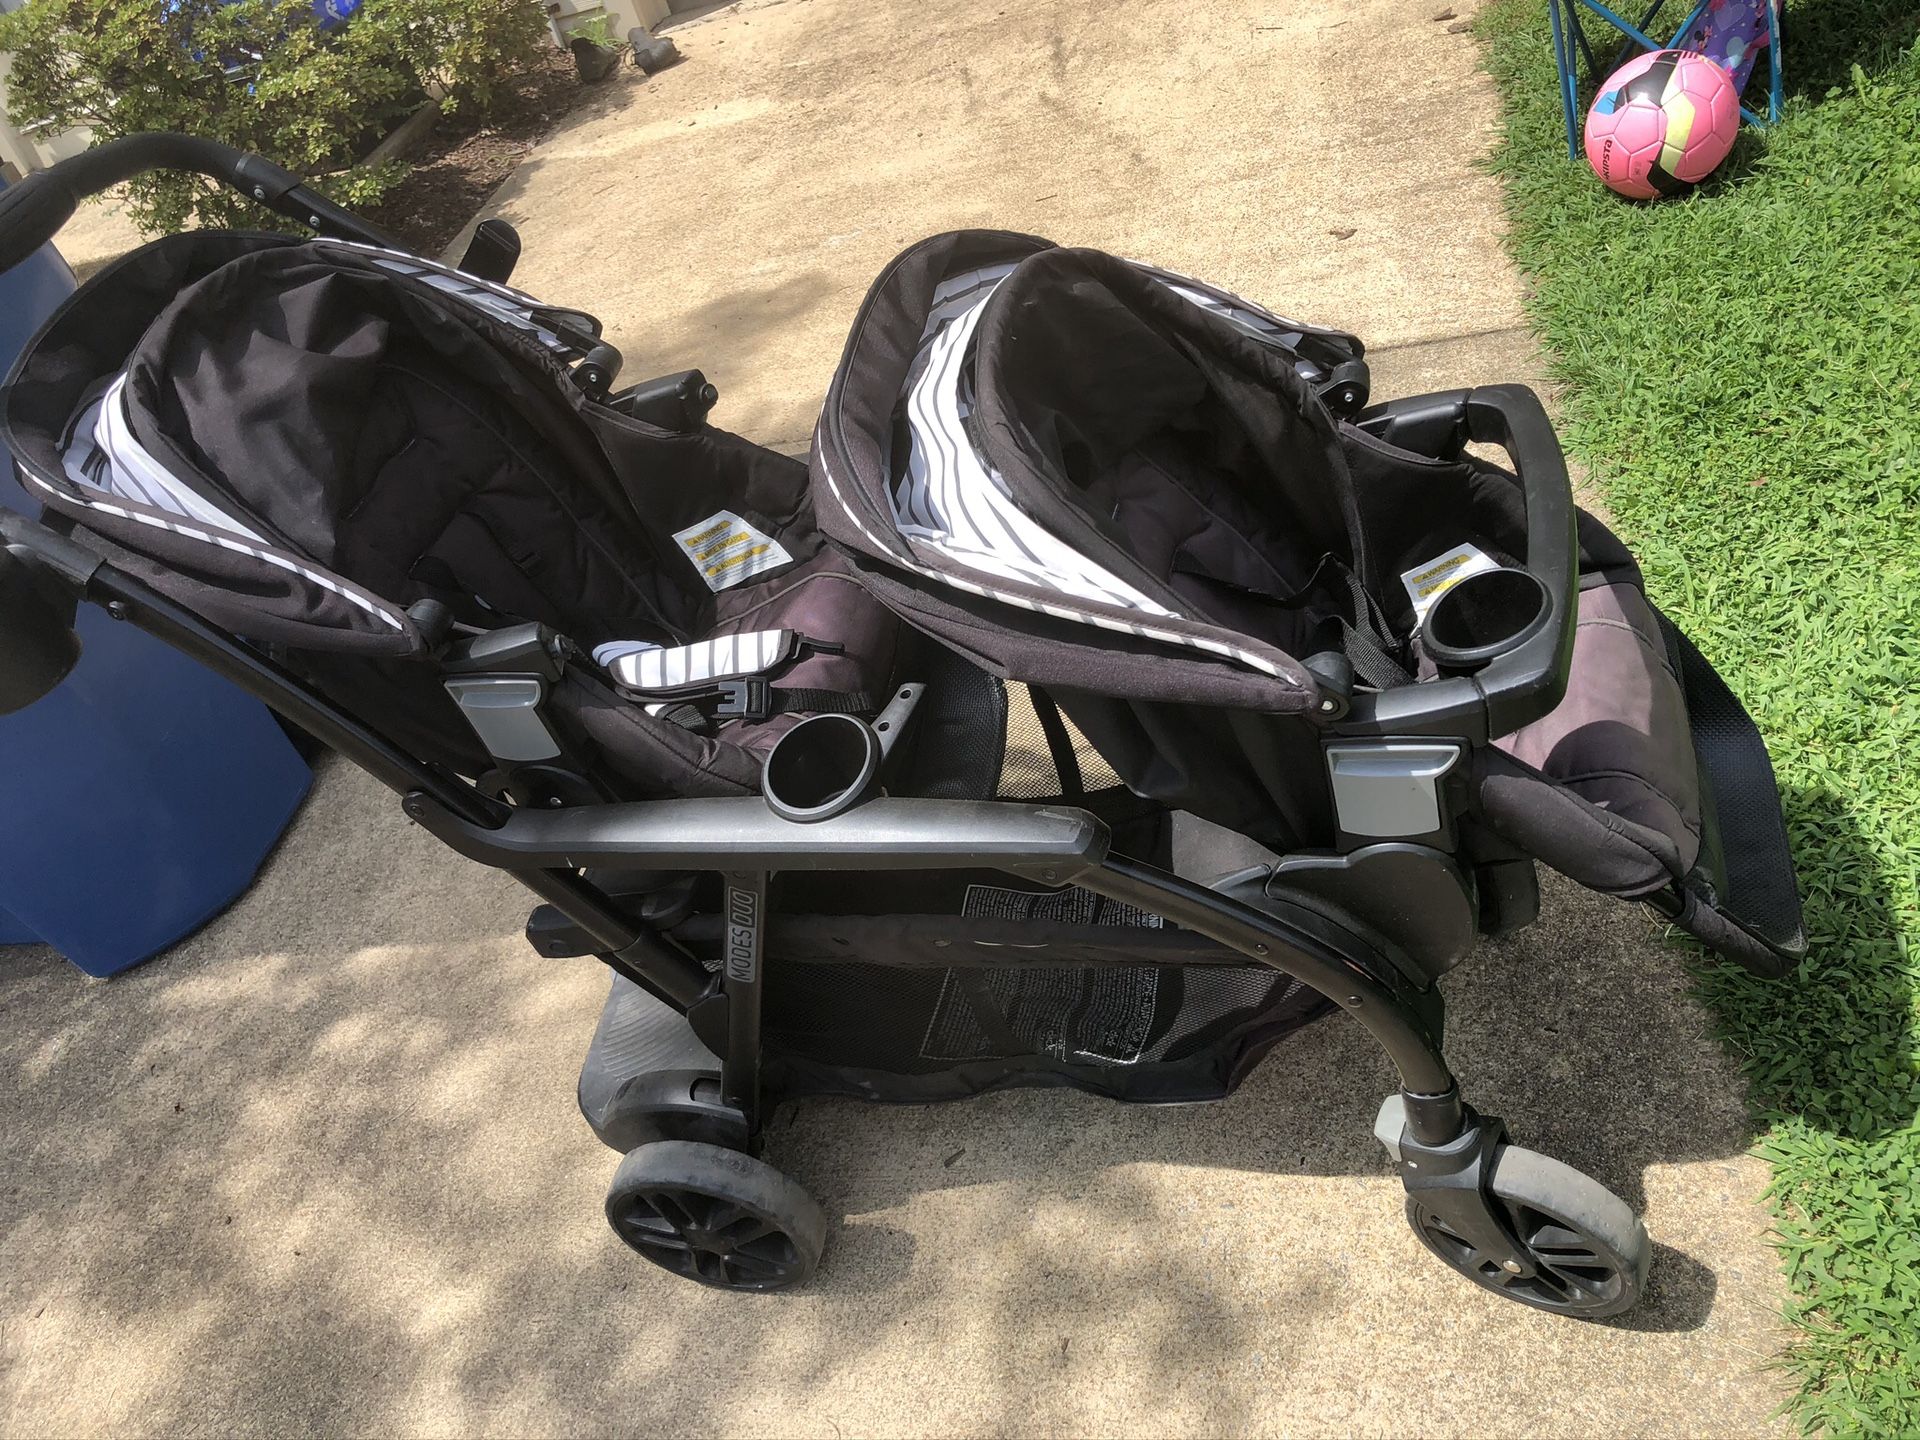 Modes Duo double stroller